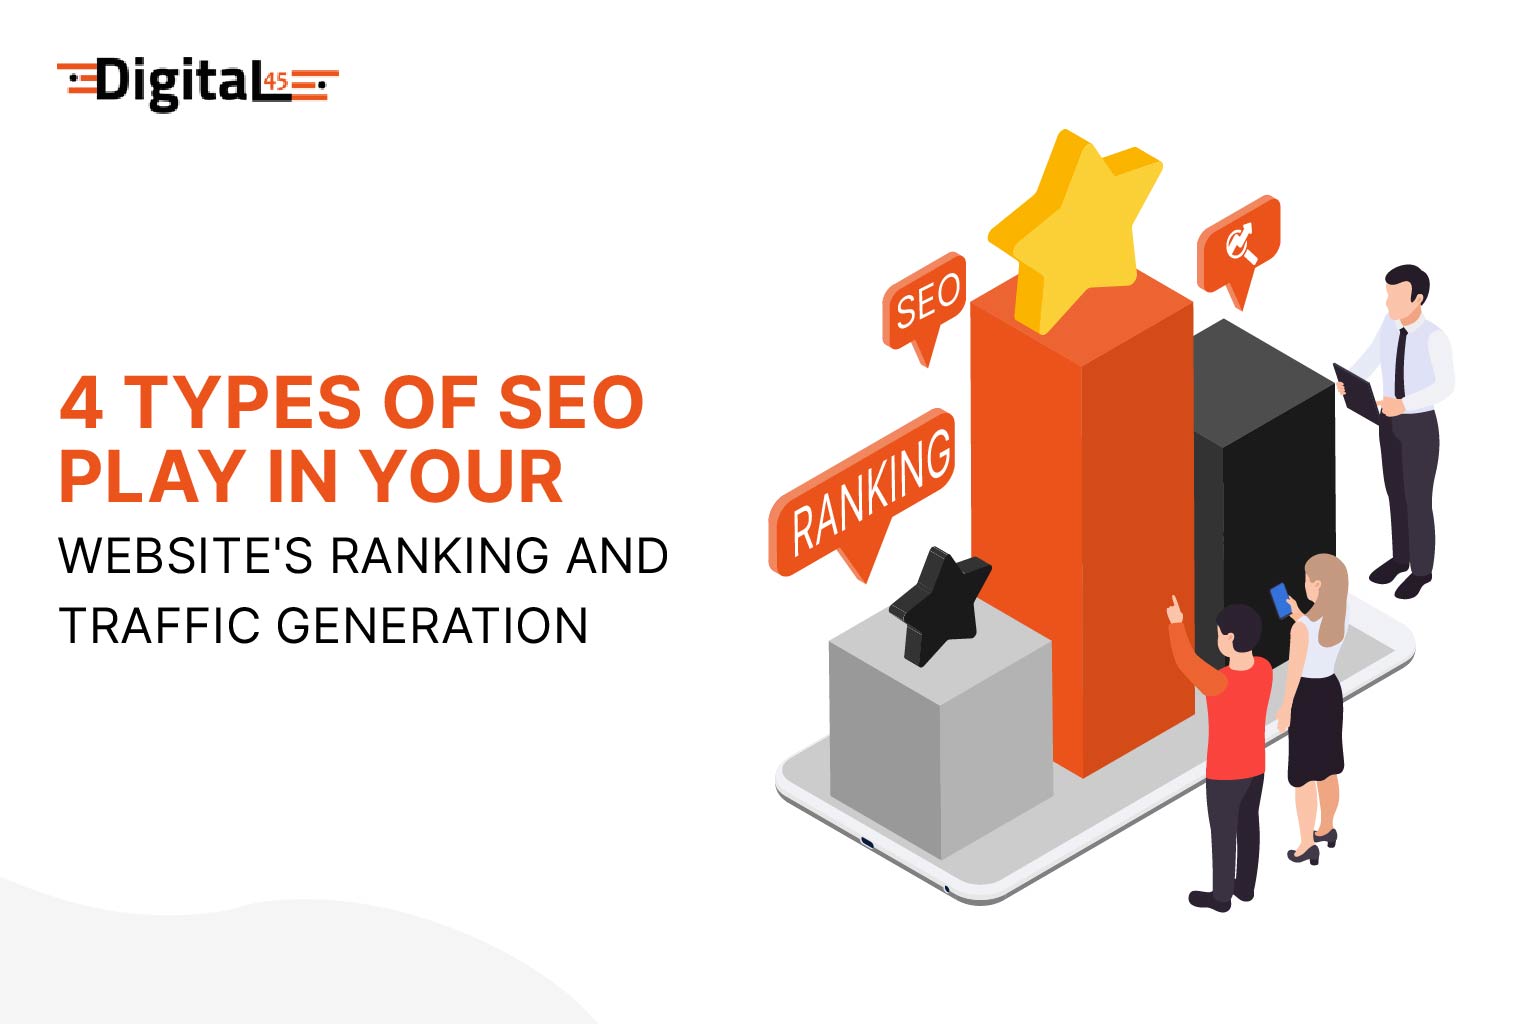 4 Types of SEO Play in Your Website's Ranking and Traffic Generation